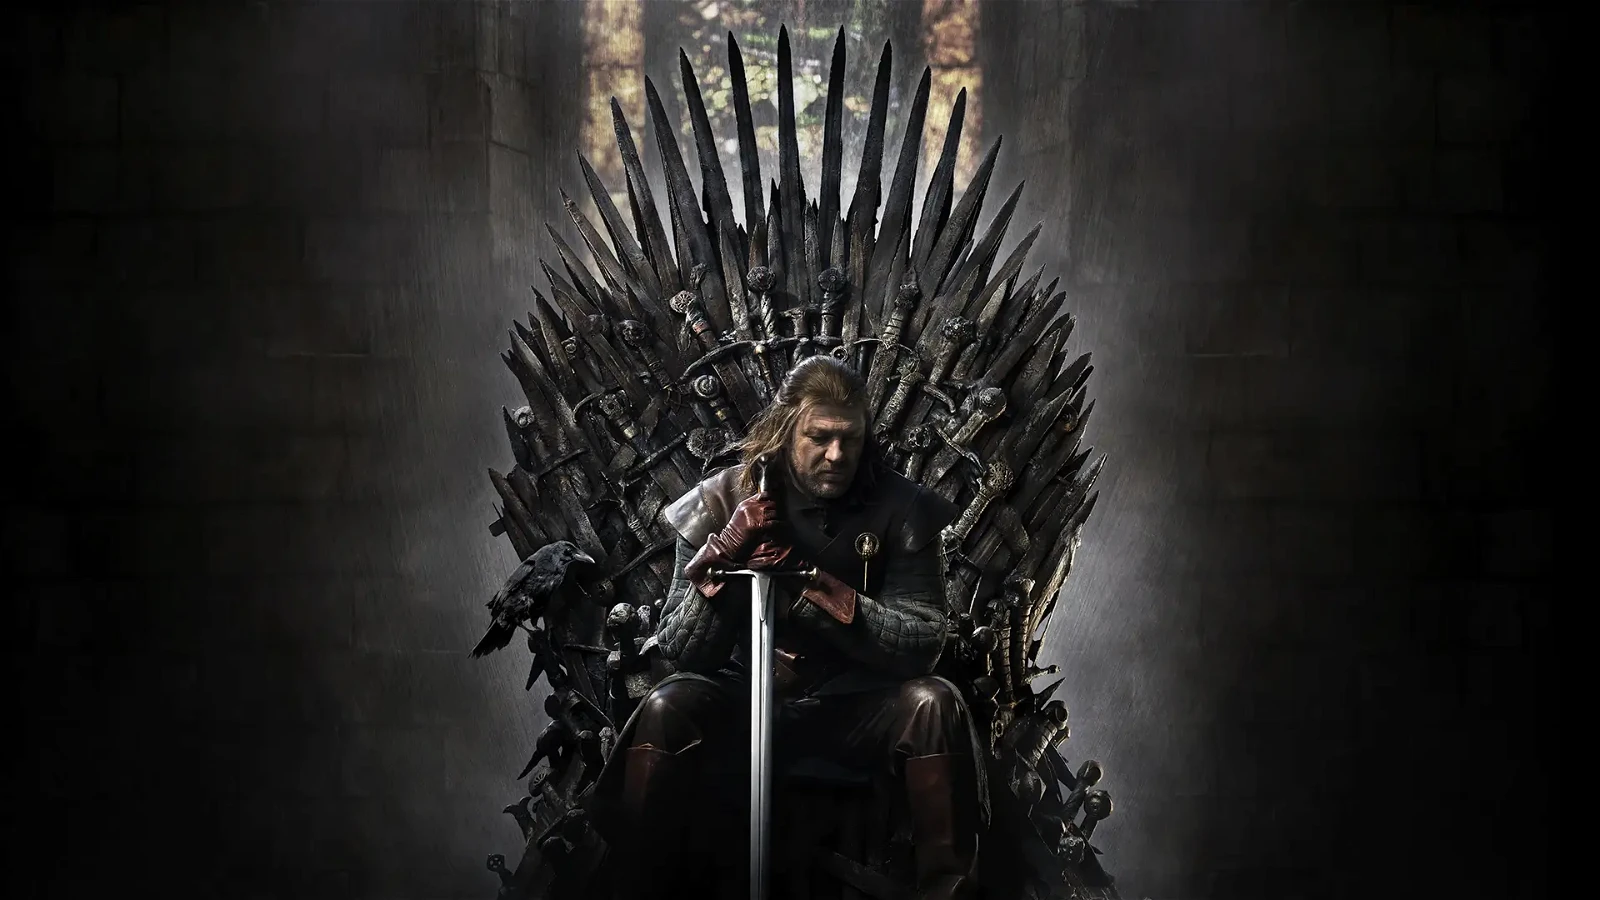 Promotional for Game of Thrones